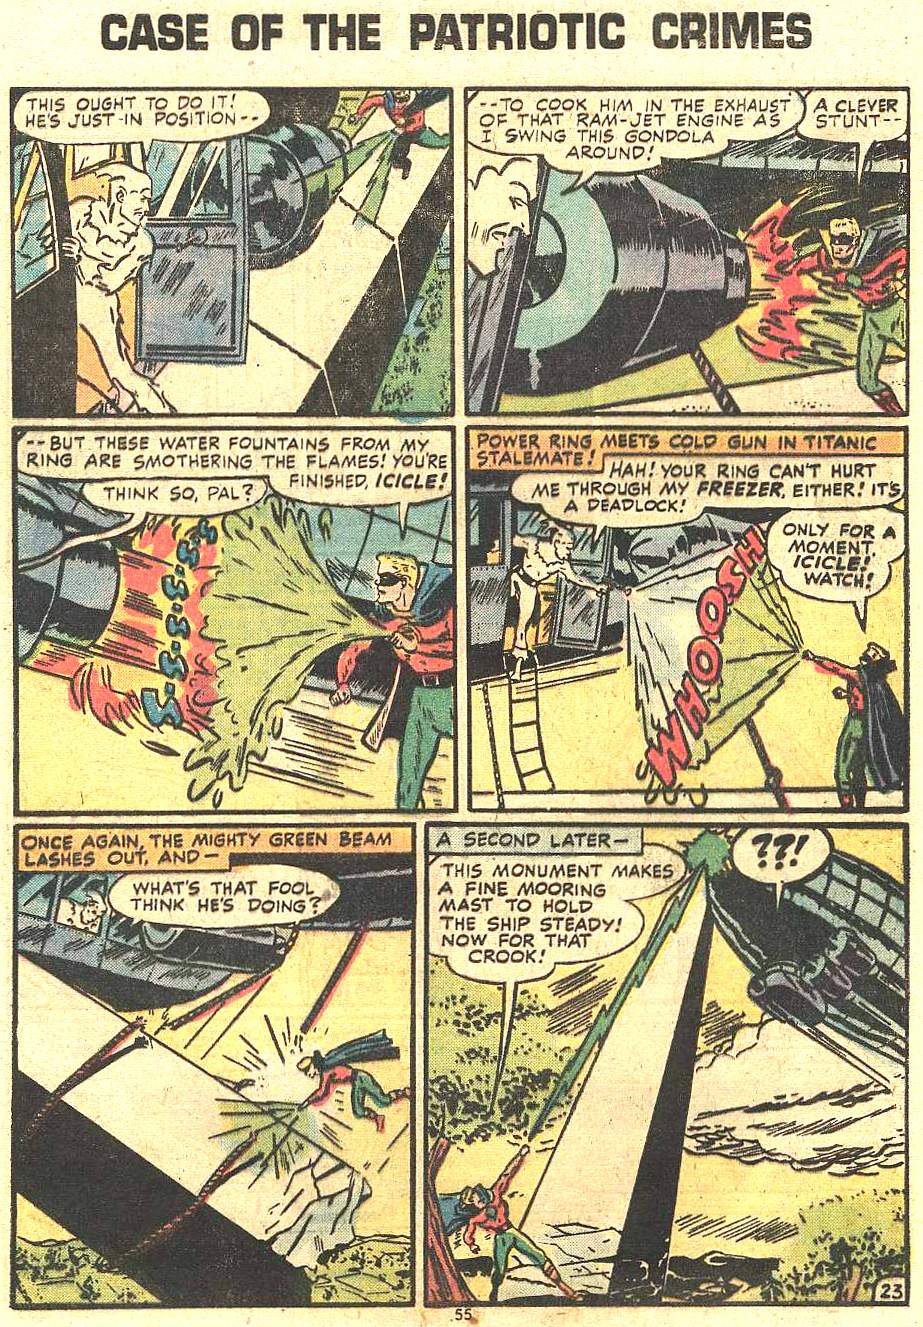 Justice League of America (1960) 113 Page 48